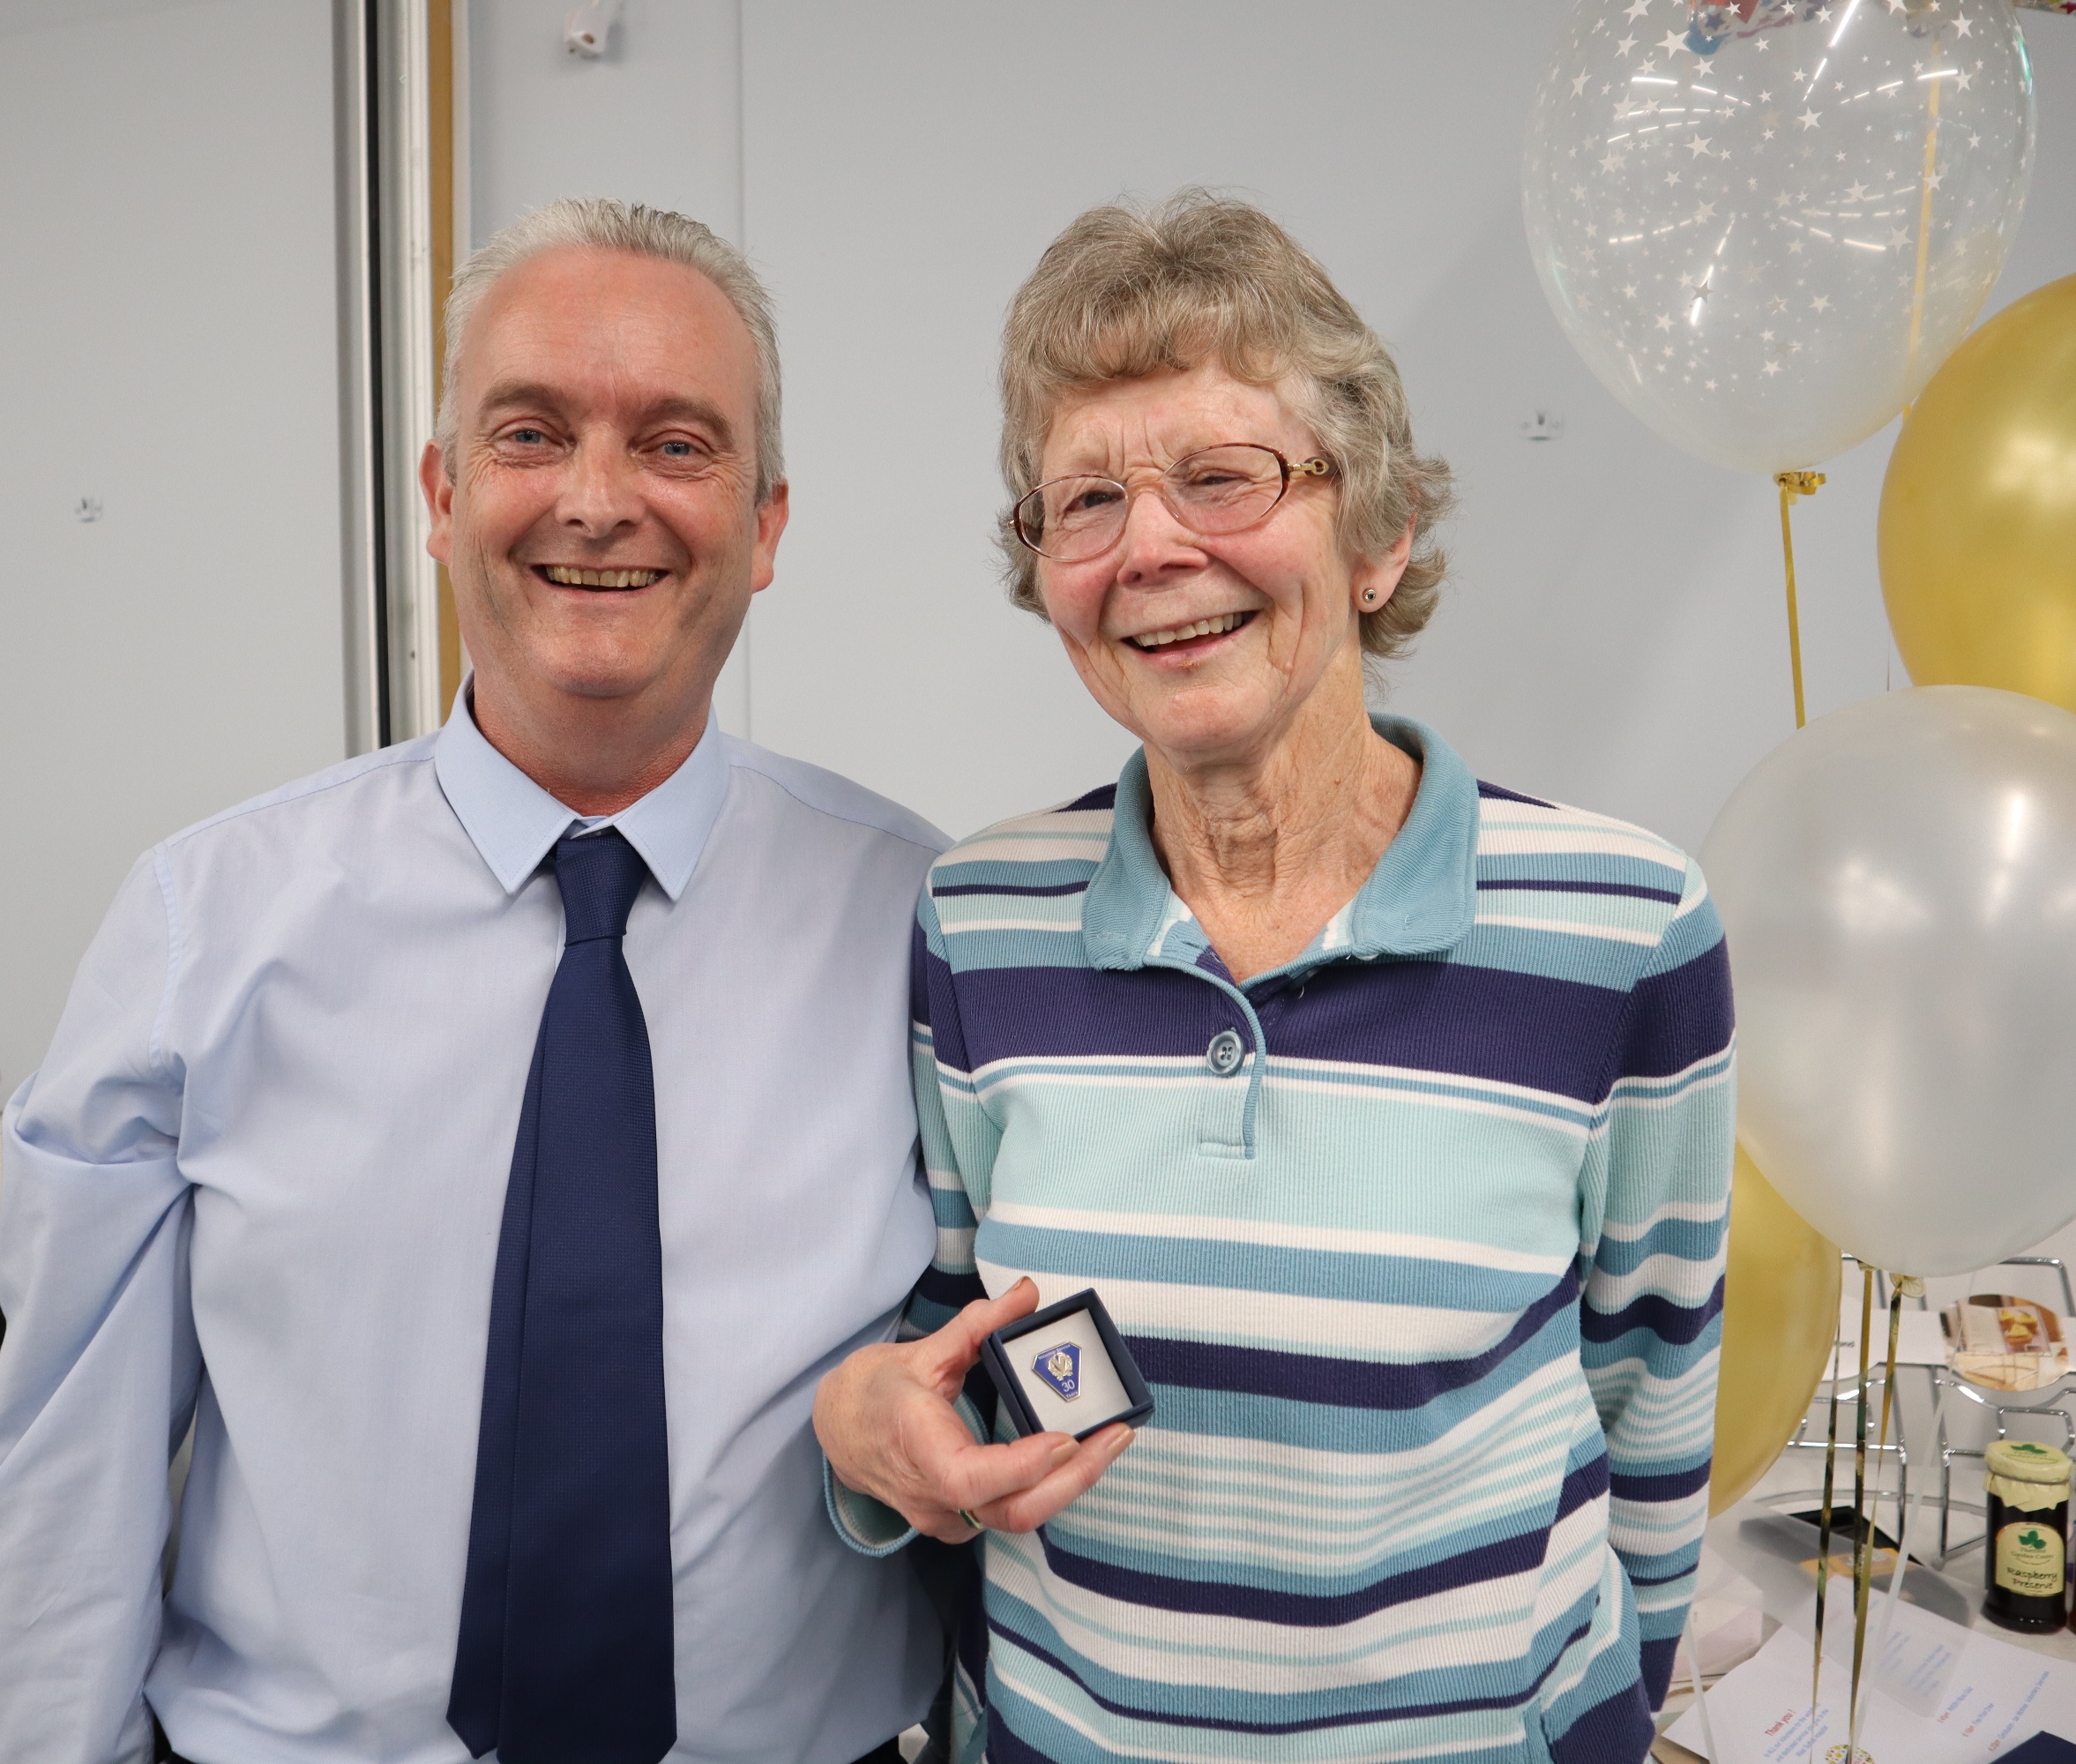 Ian McKee, voluntary services manager, with Christine Hinchley, who was thanked for giving an incredible 30 years of service to West Suffolk Hospital as a volunteer